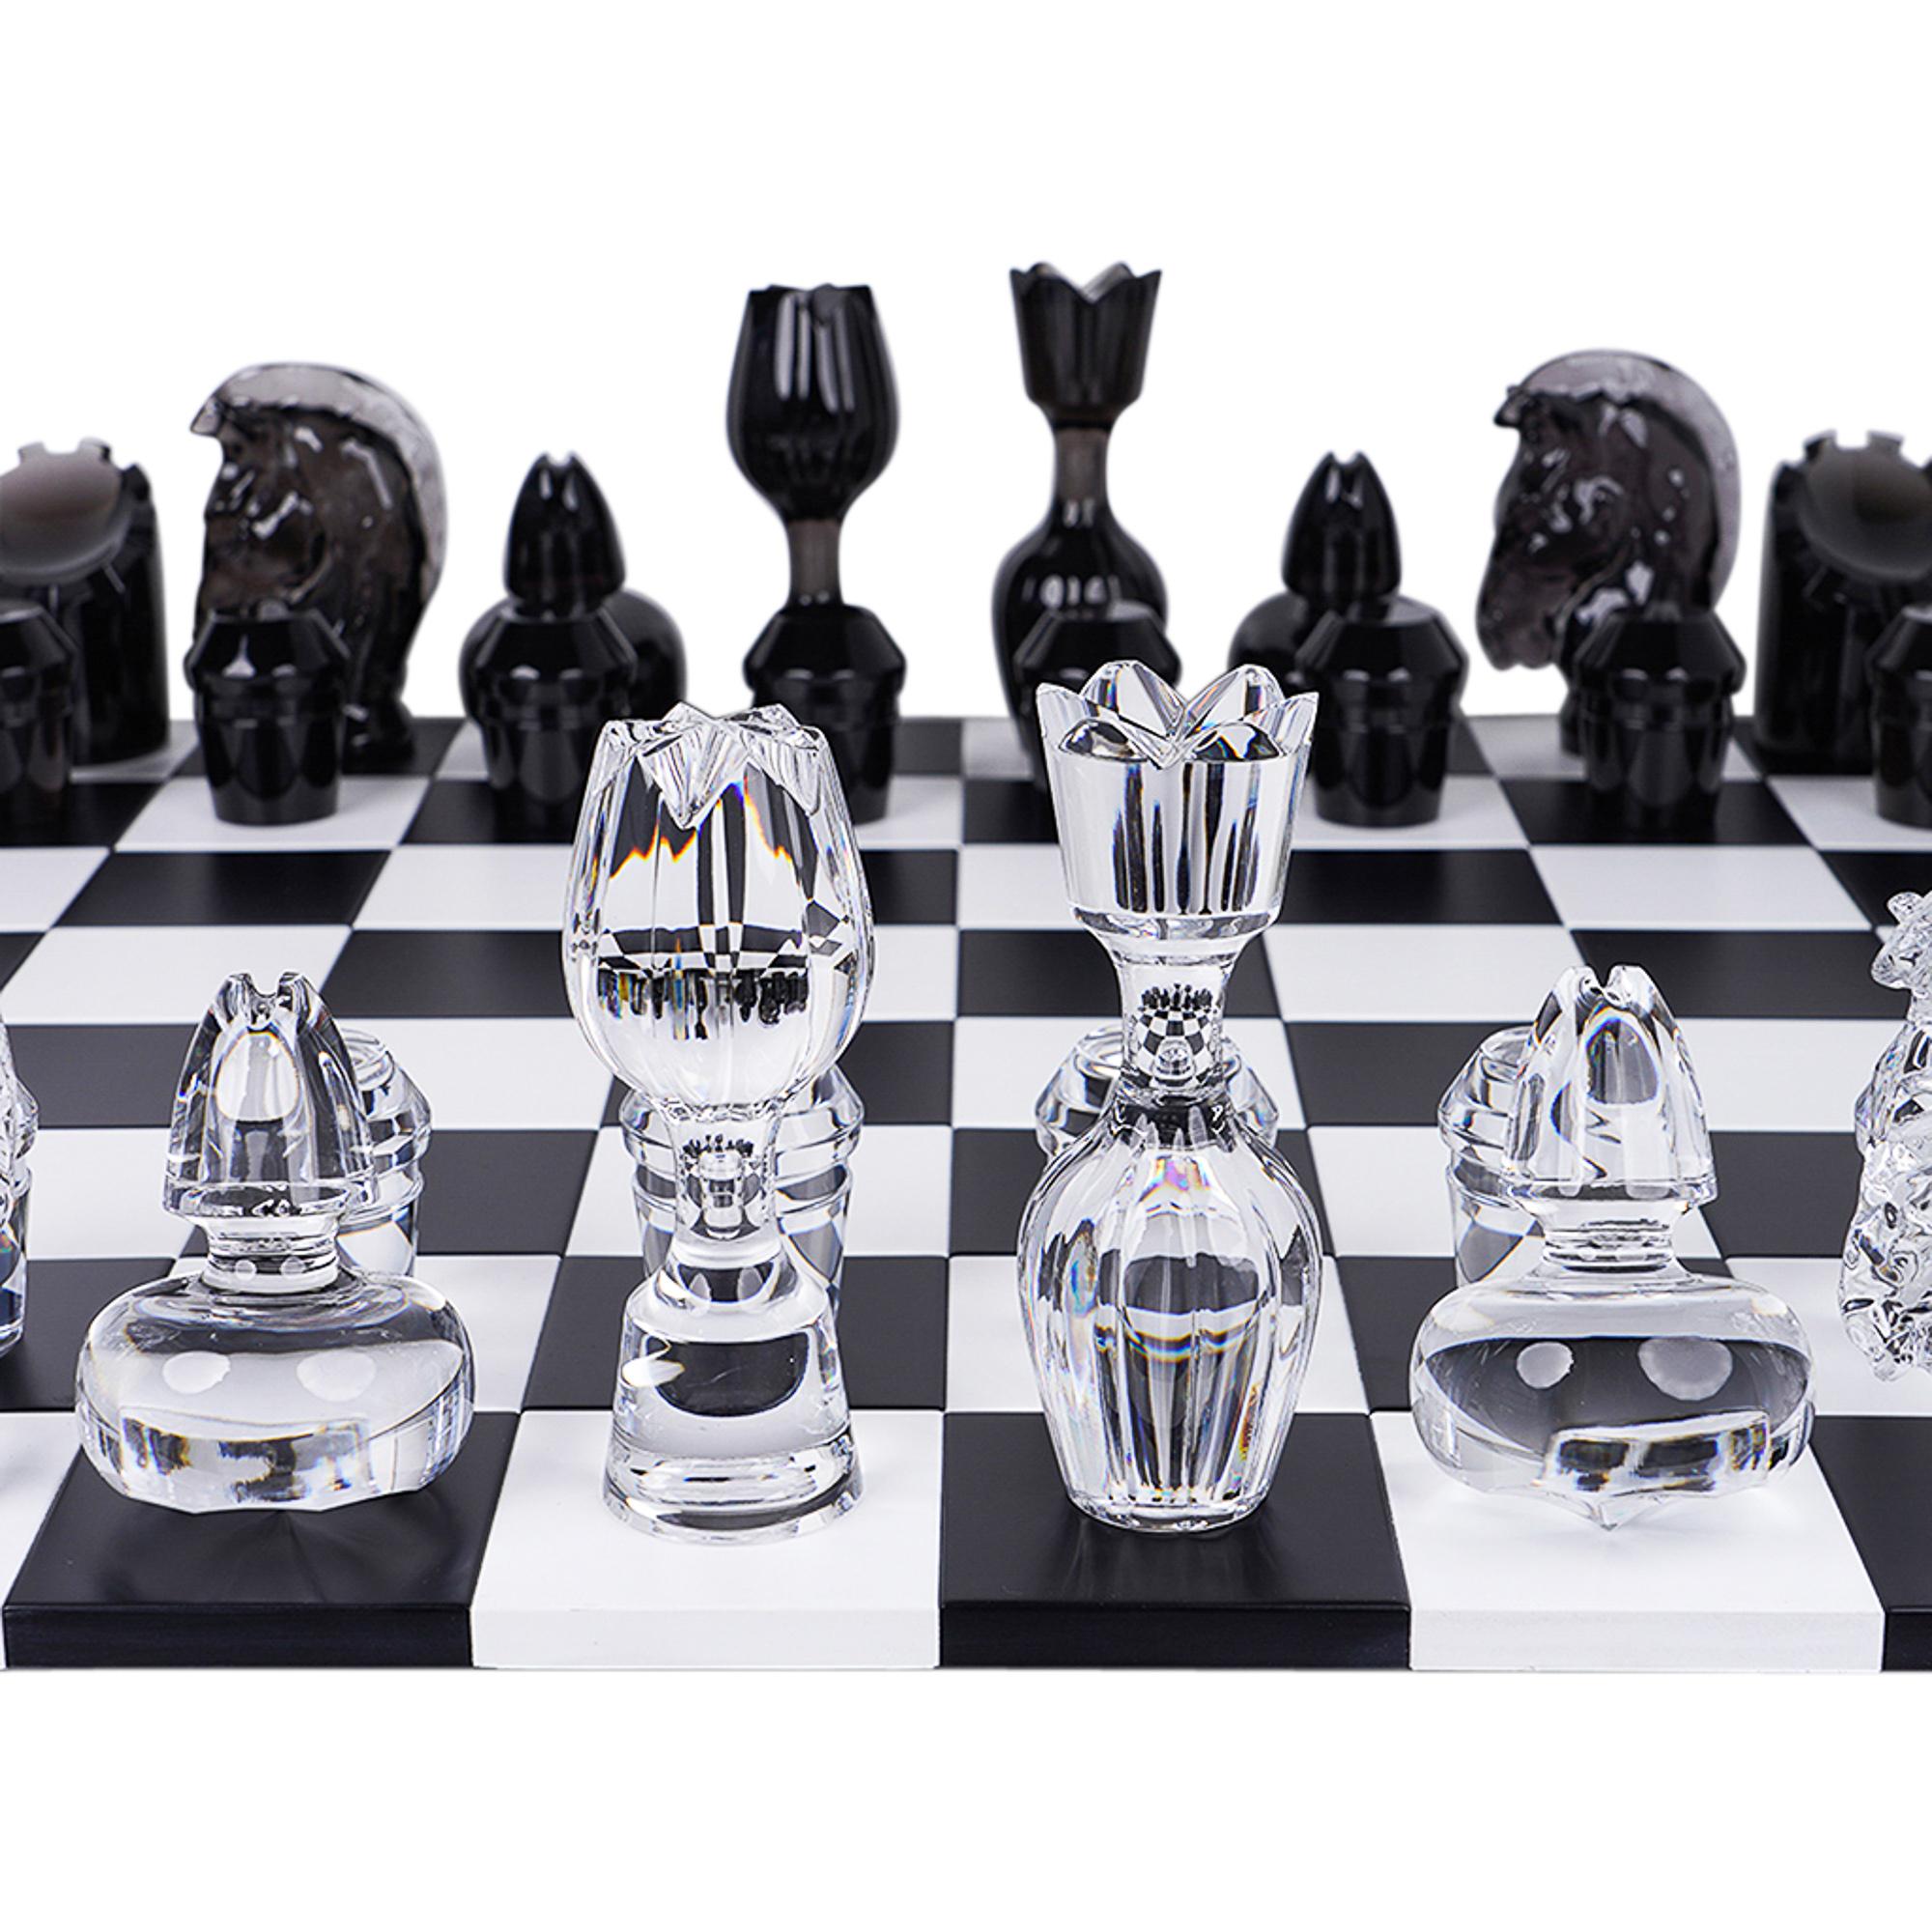 Mightychic offers a Limited edition Saint-Louis Chess Game featured in Jeu Flannel-Grey and Wood.
Each chess piece is beautifully inspired by Saint-Louis' classic decanter stoppers.
The chess game board is beech wood and is covered with a matte